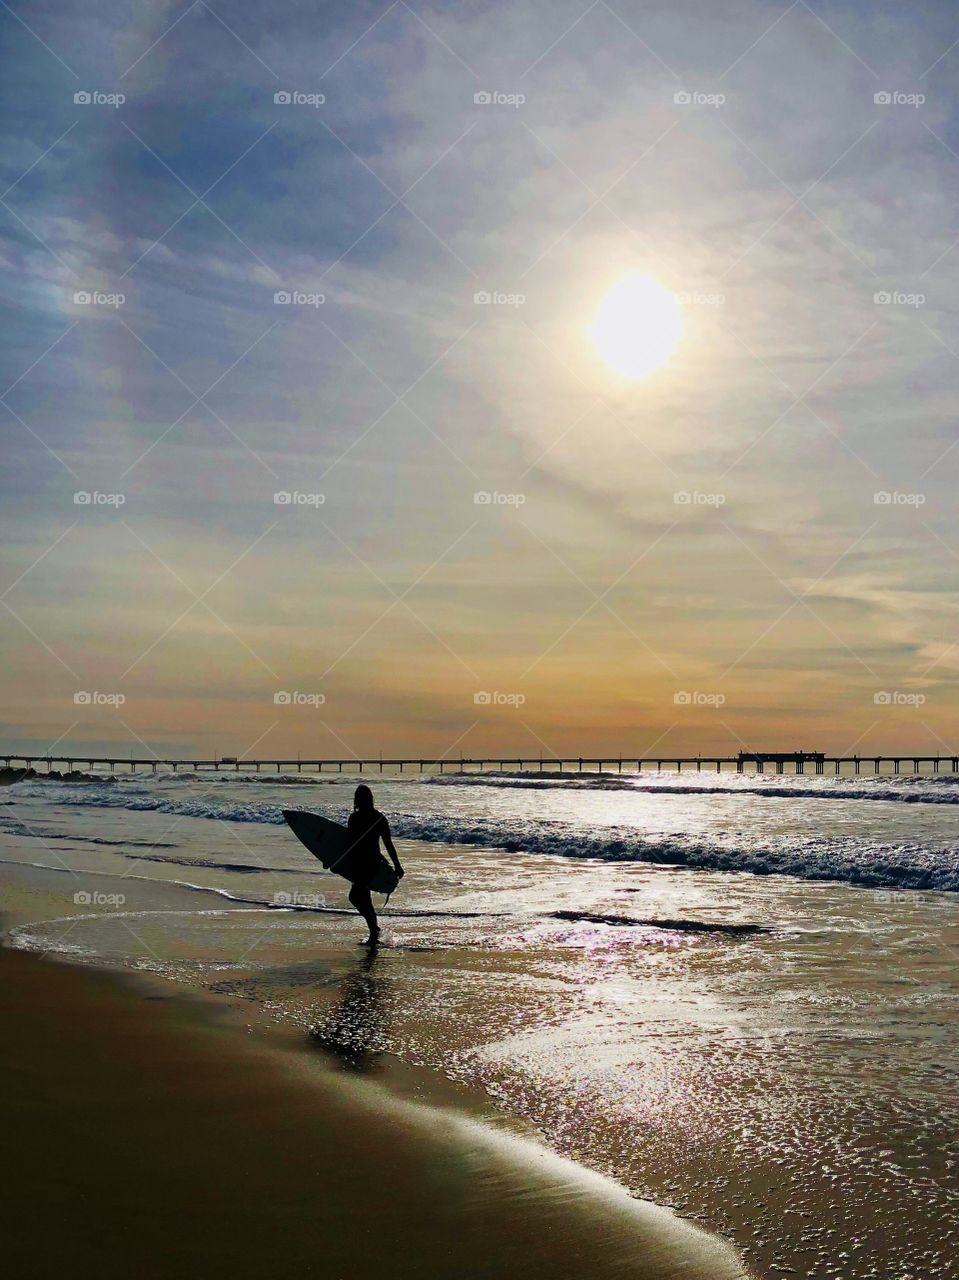 The silhouette of a surfer emerges from the water, bright lit sky behind them. Light bounces off the ocean while the sun begins to set.